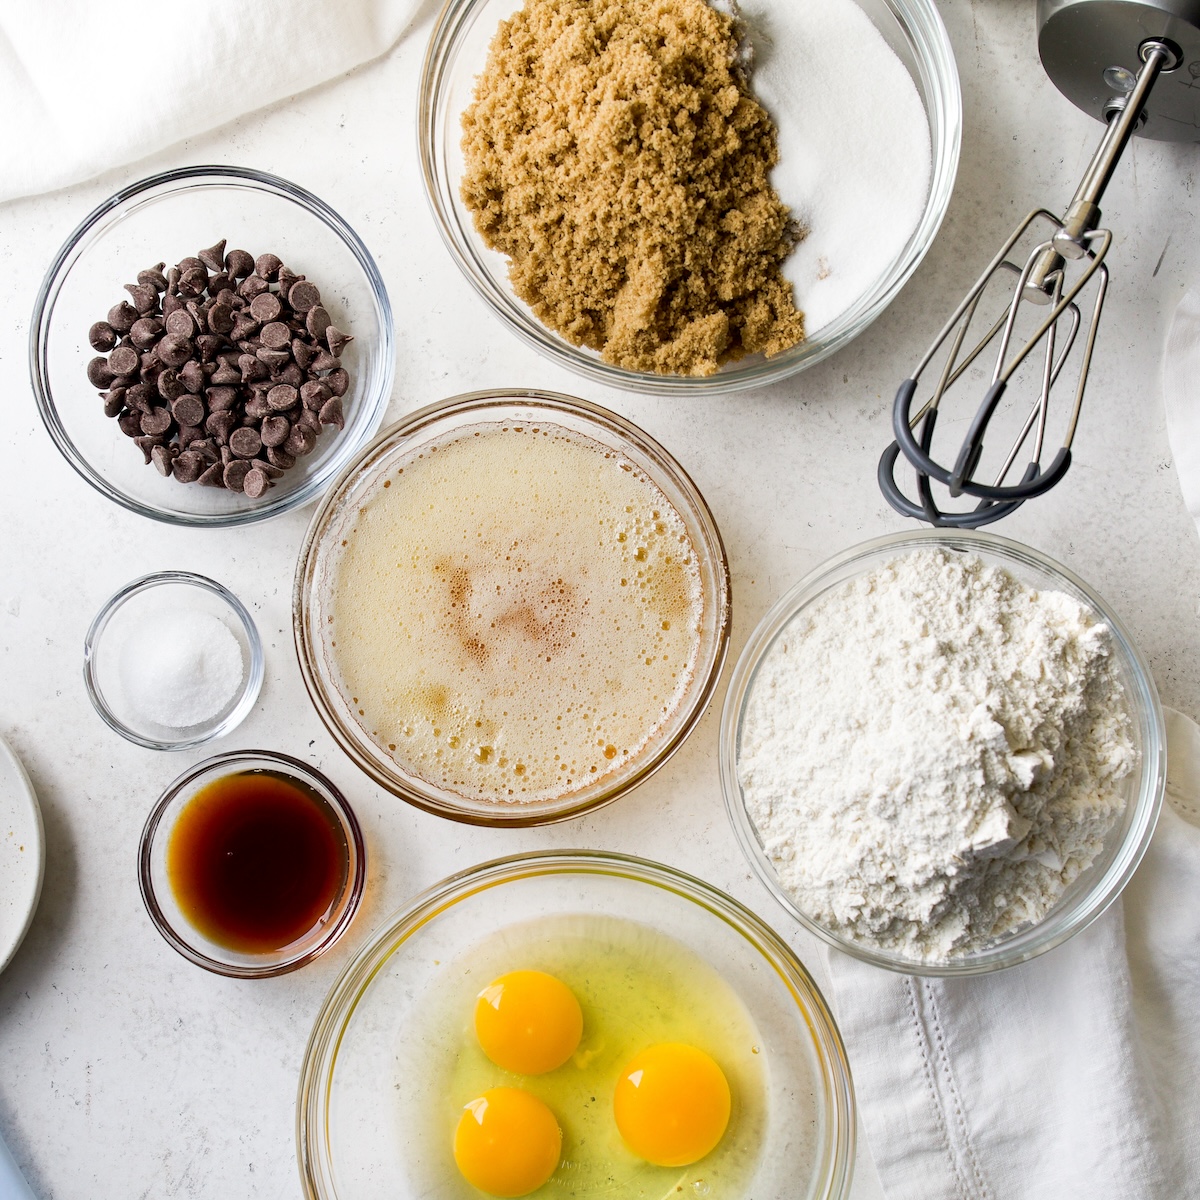 All of the ingredients you need to make classic brown butter blondies.